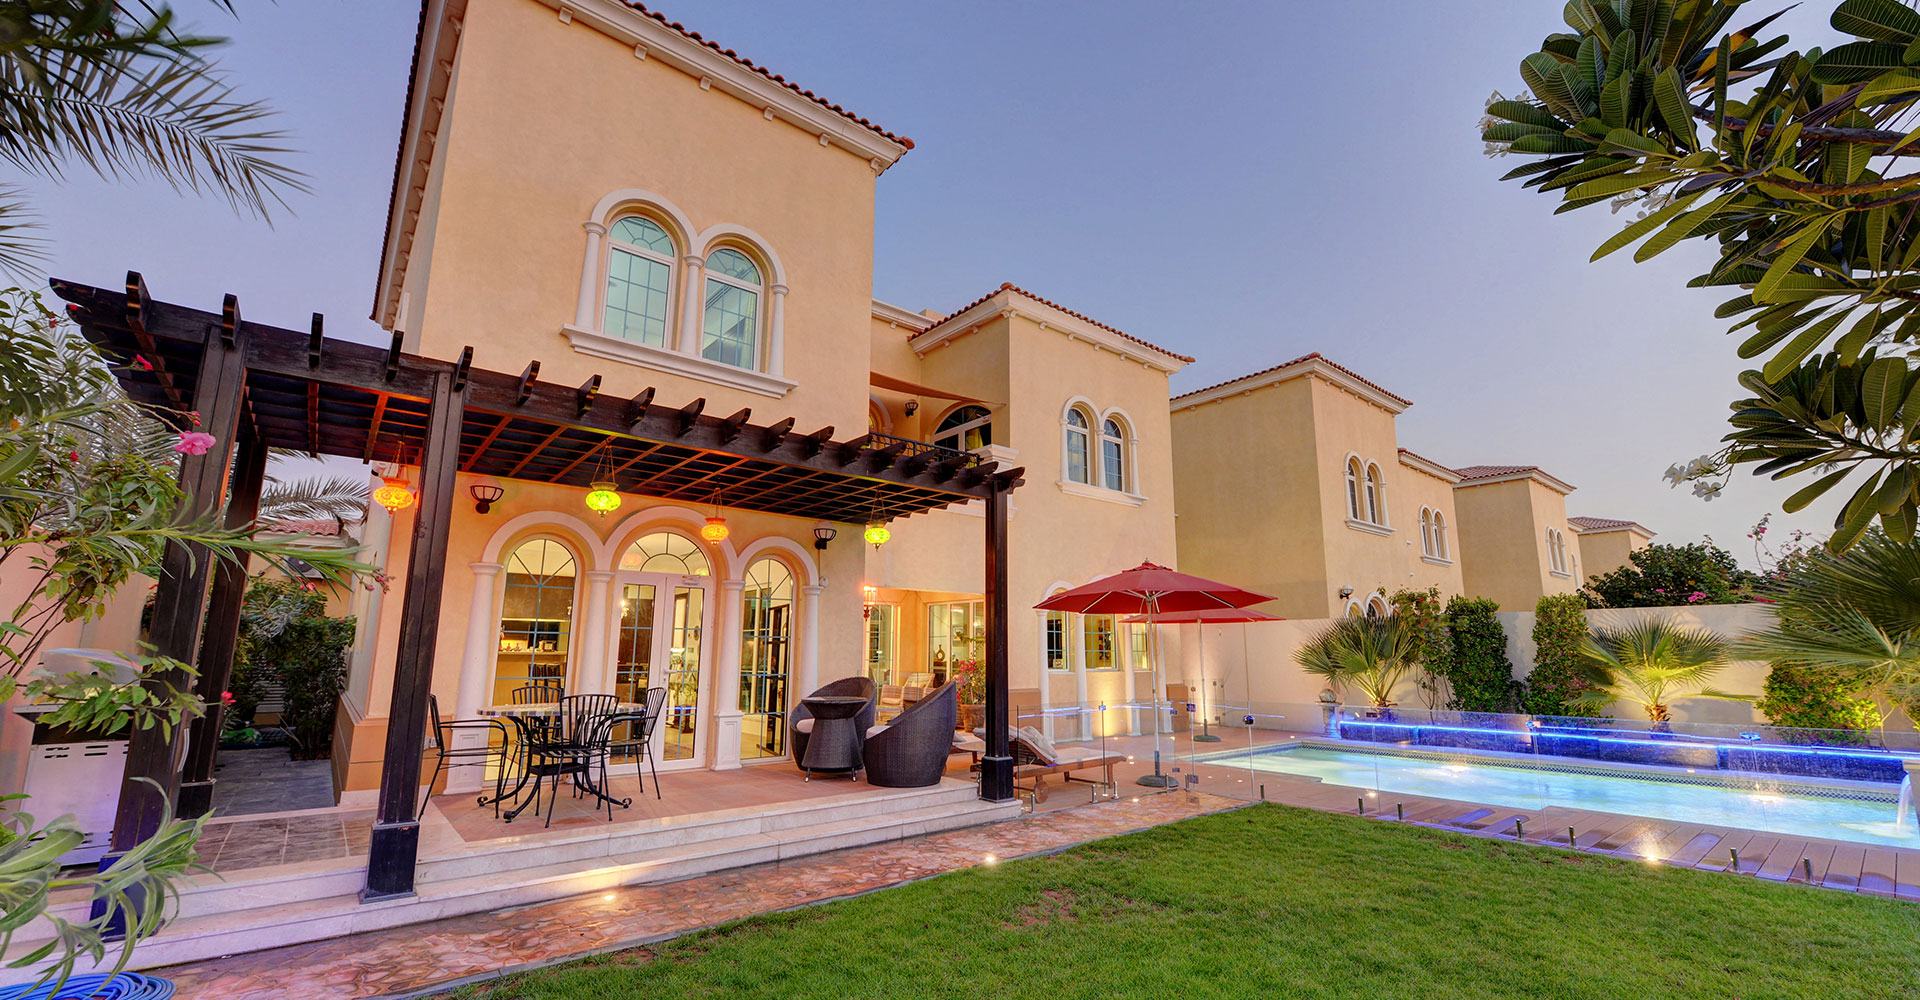 JVT Villas an Amazing Place for Residence in Dubai